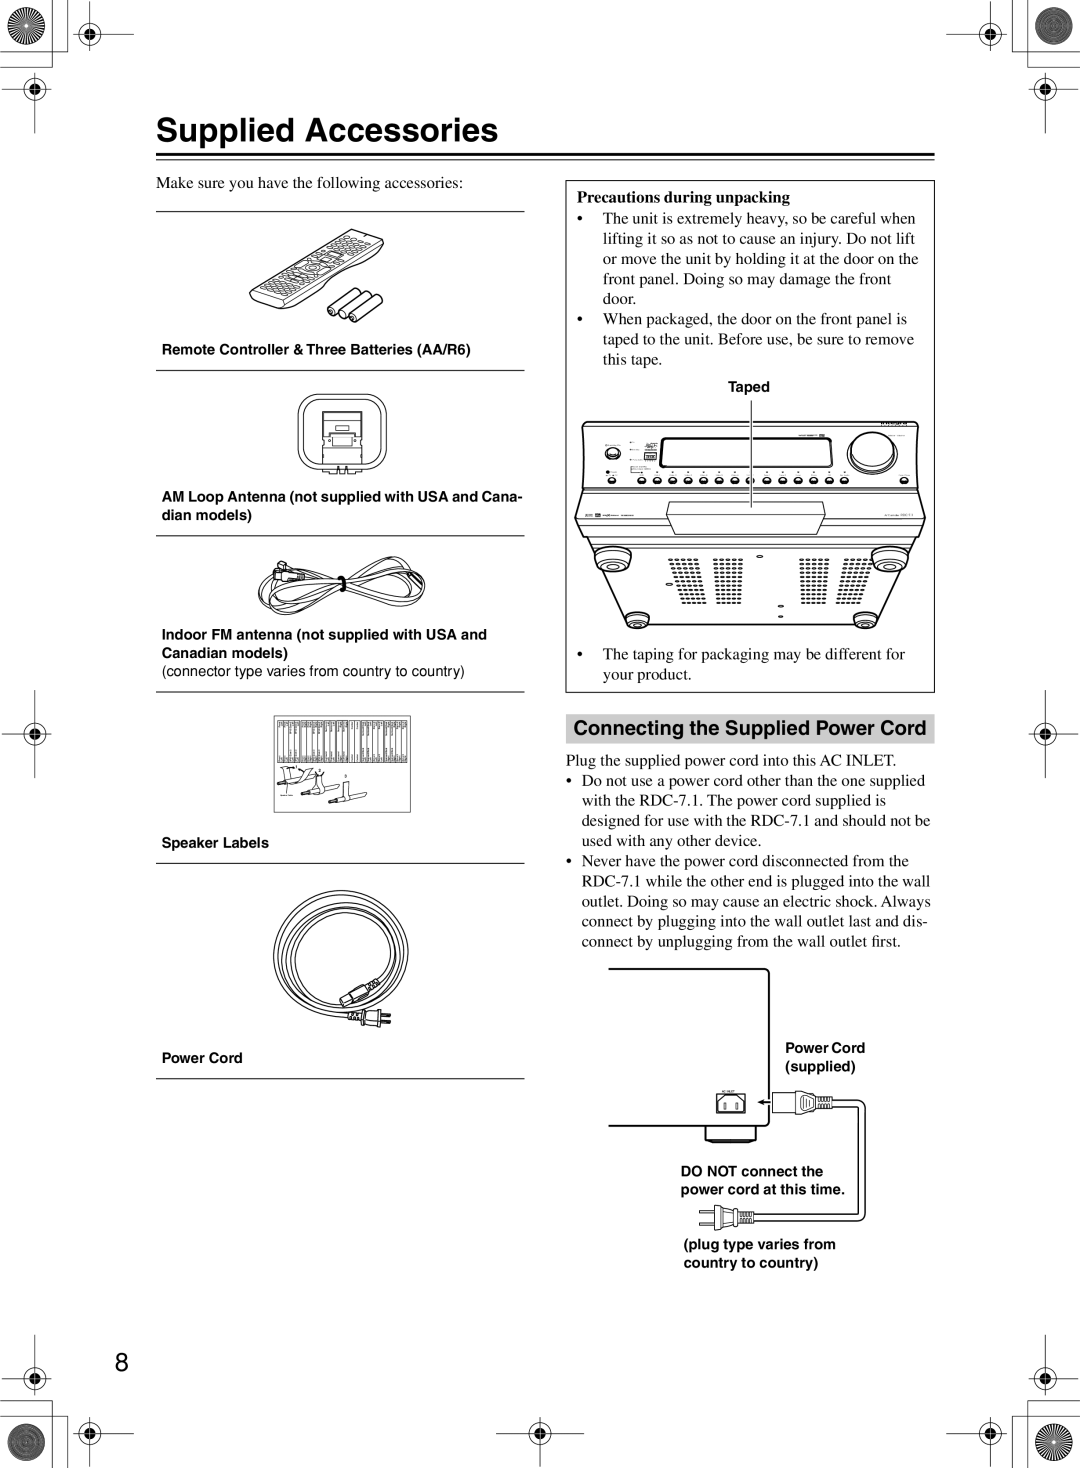 Integra RDC-7.1 instruction manual Supplied Accessories, Connecting the Supplied Power Cord, Precautions during unpacking 